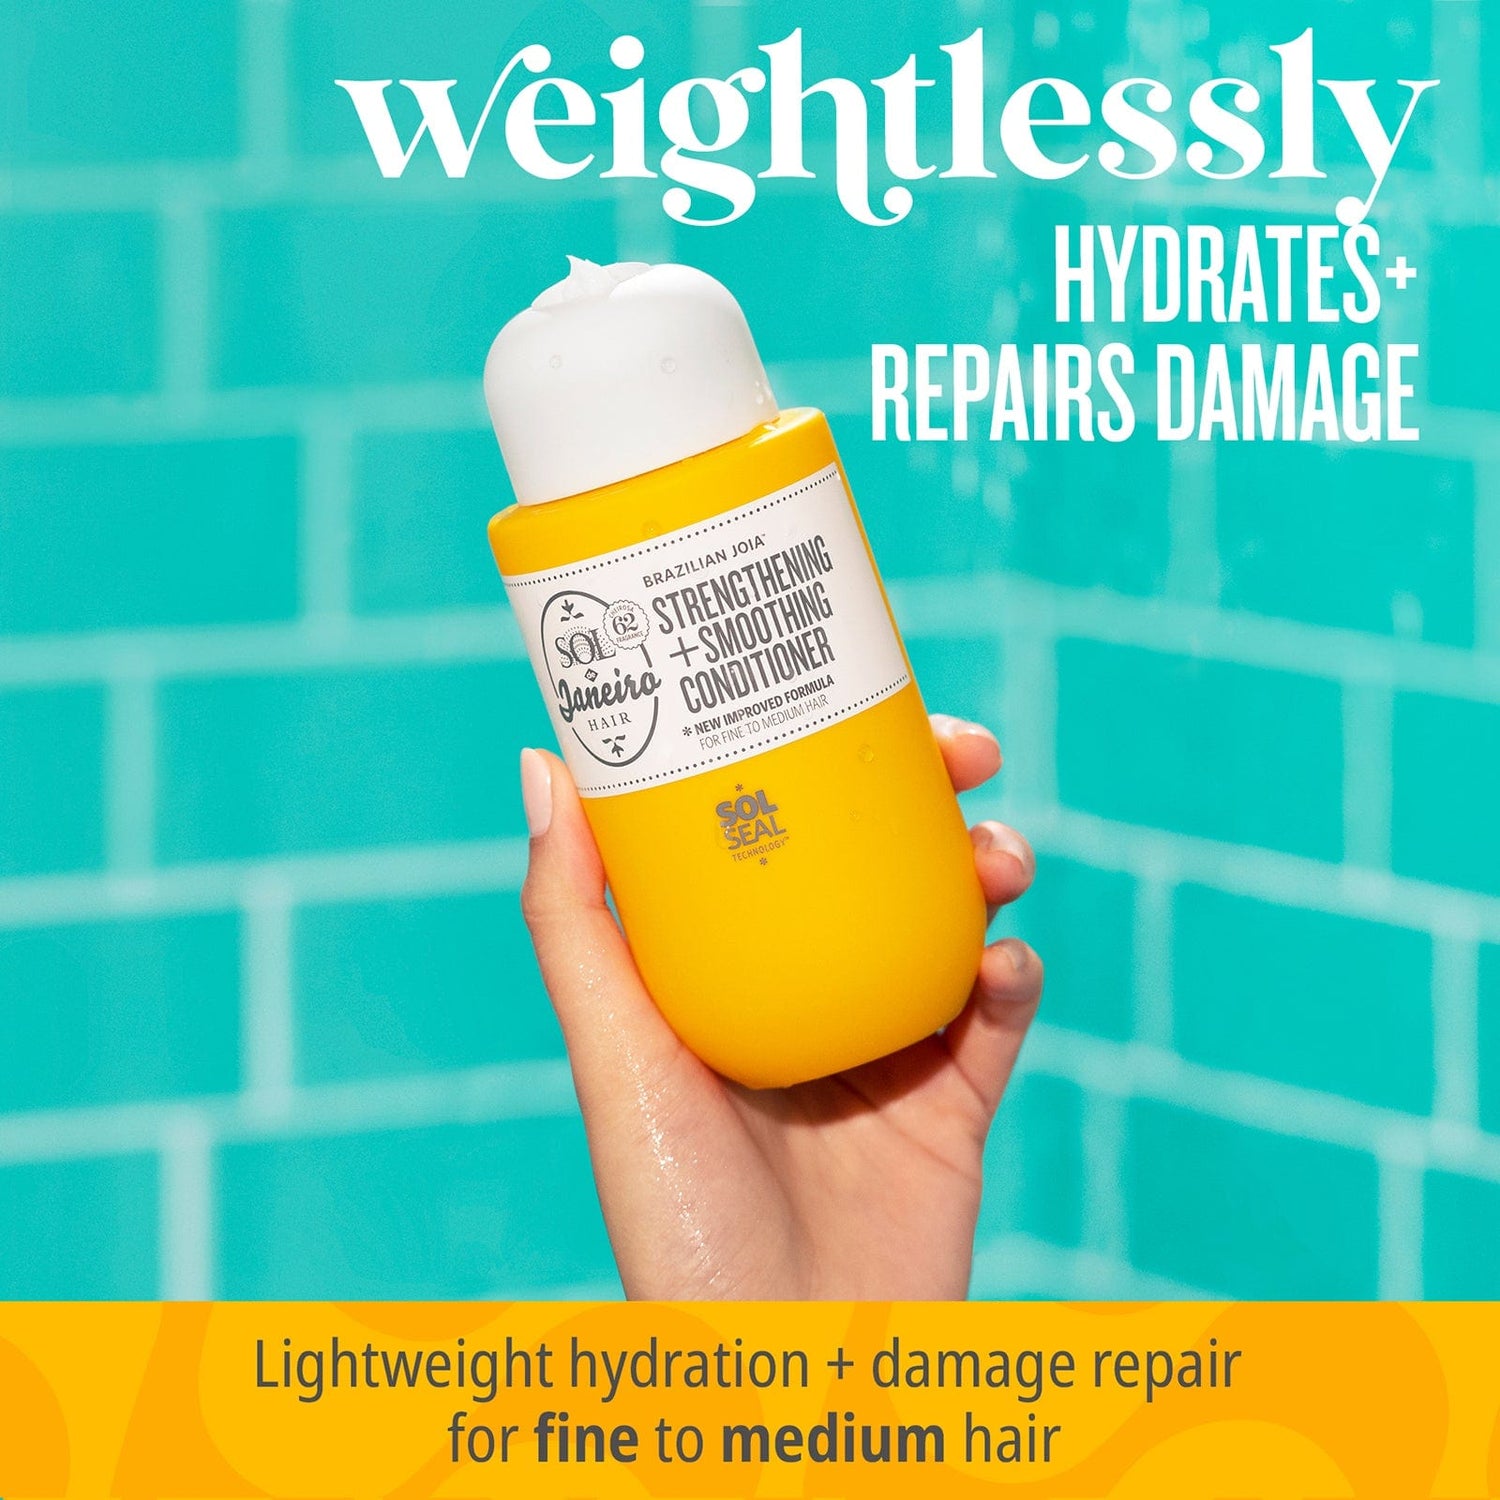 Weghtlessly Hydrates and repairs damage | Lightweight hydration and damage repair for fine to medium hair